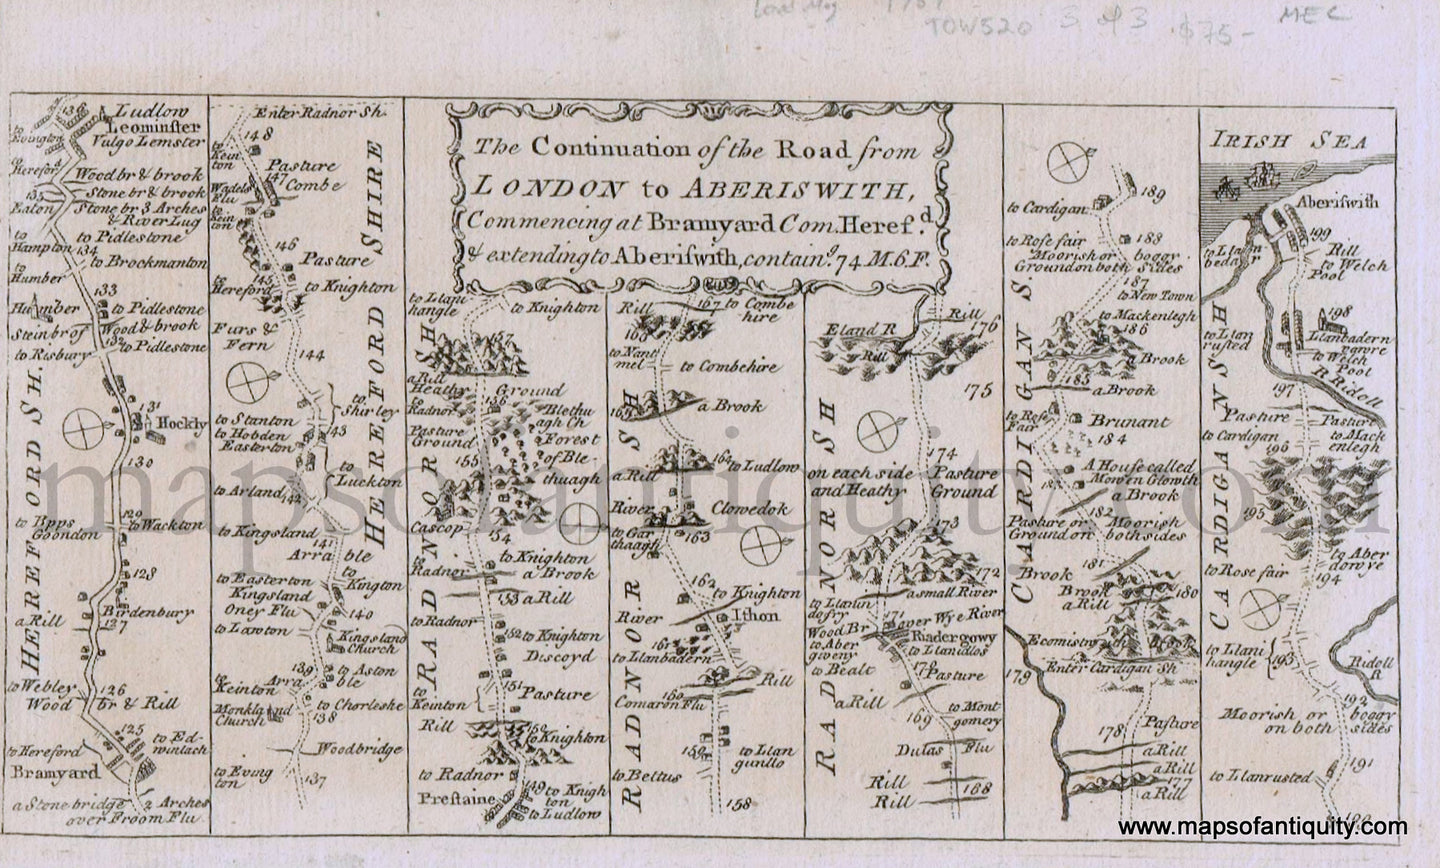 Antique-Black-and-White-Map-Part-of-The-Road-from-London-to-Aberistwith-commencing-at-Bramyard-Com.-Hereford-&-extending-to-Aberiswith-(Aberystwyth-Wales)-c.-1767-London-Magazine-England-1700s-18th-century-Maps-of-Antiquity